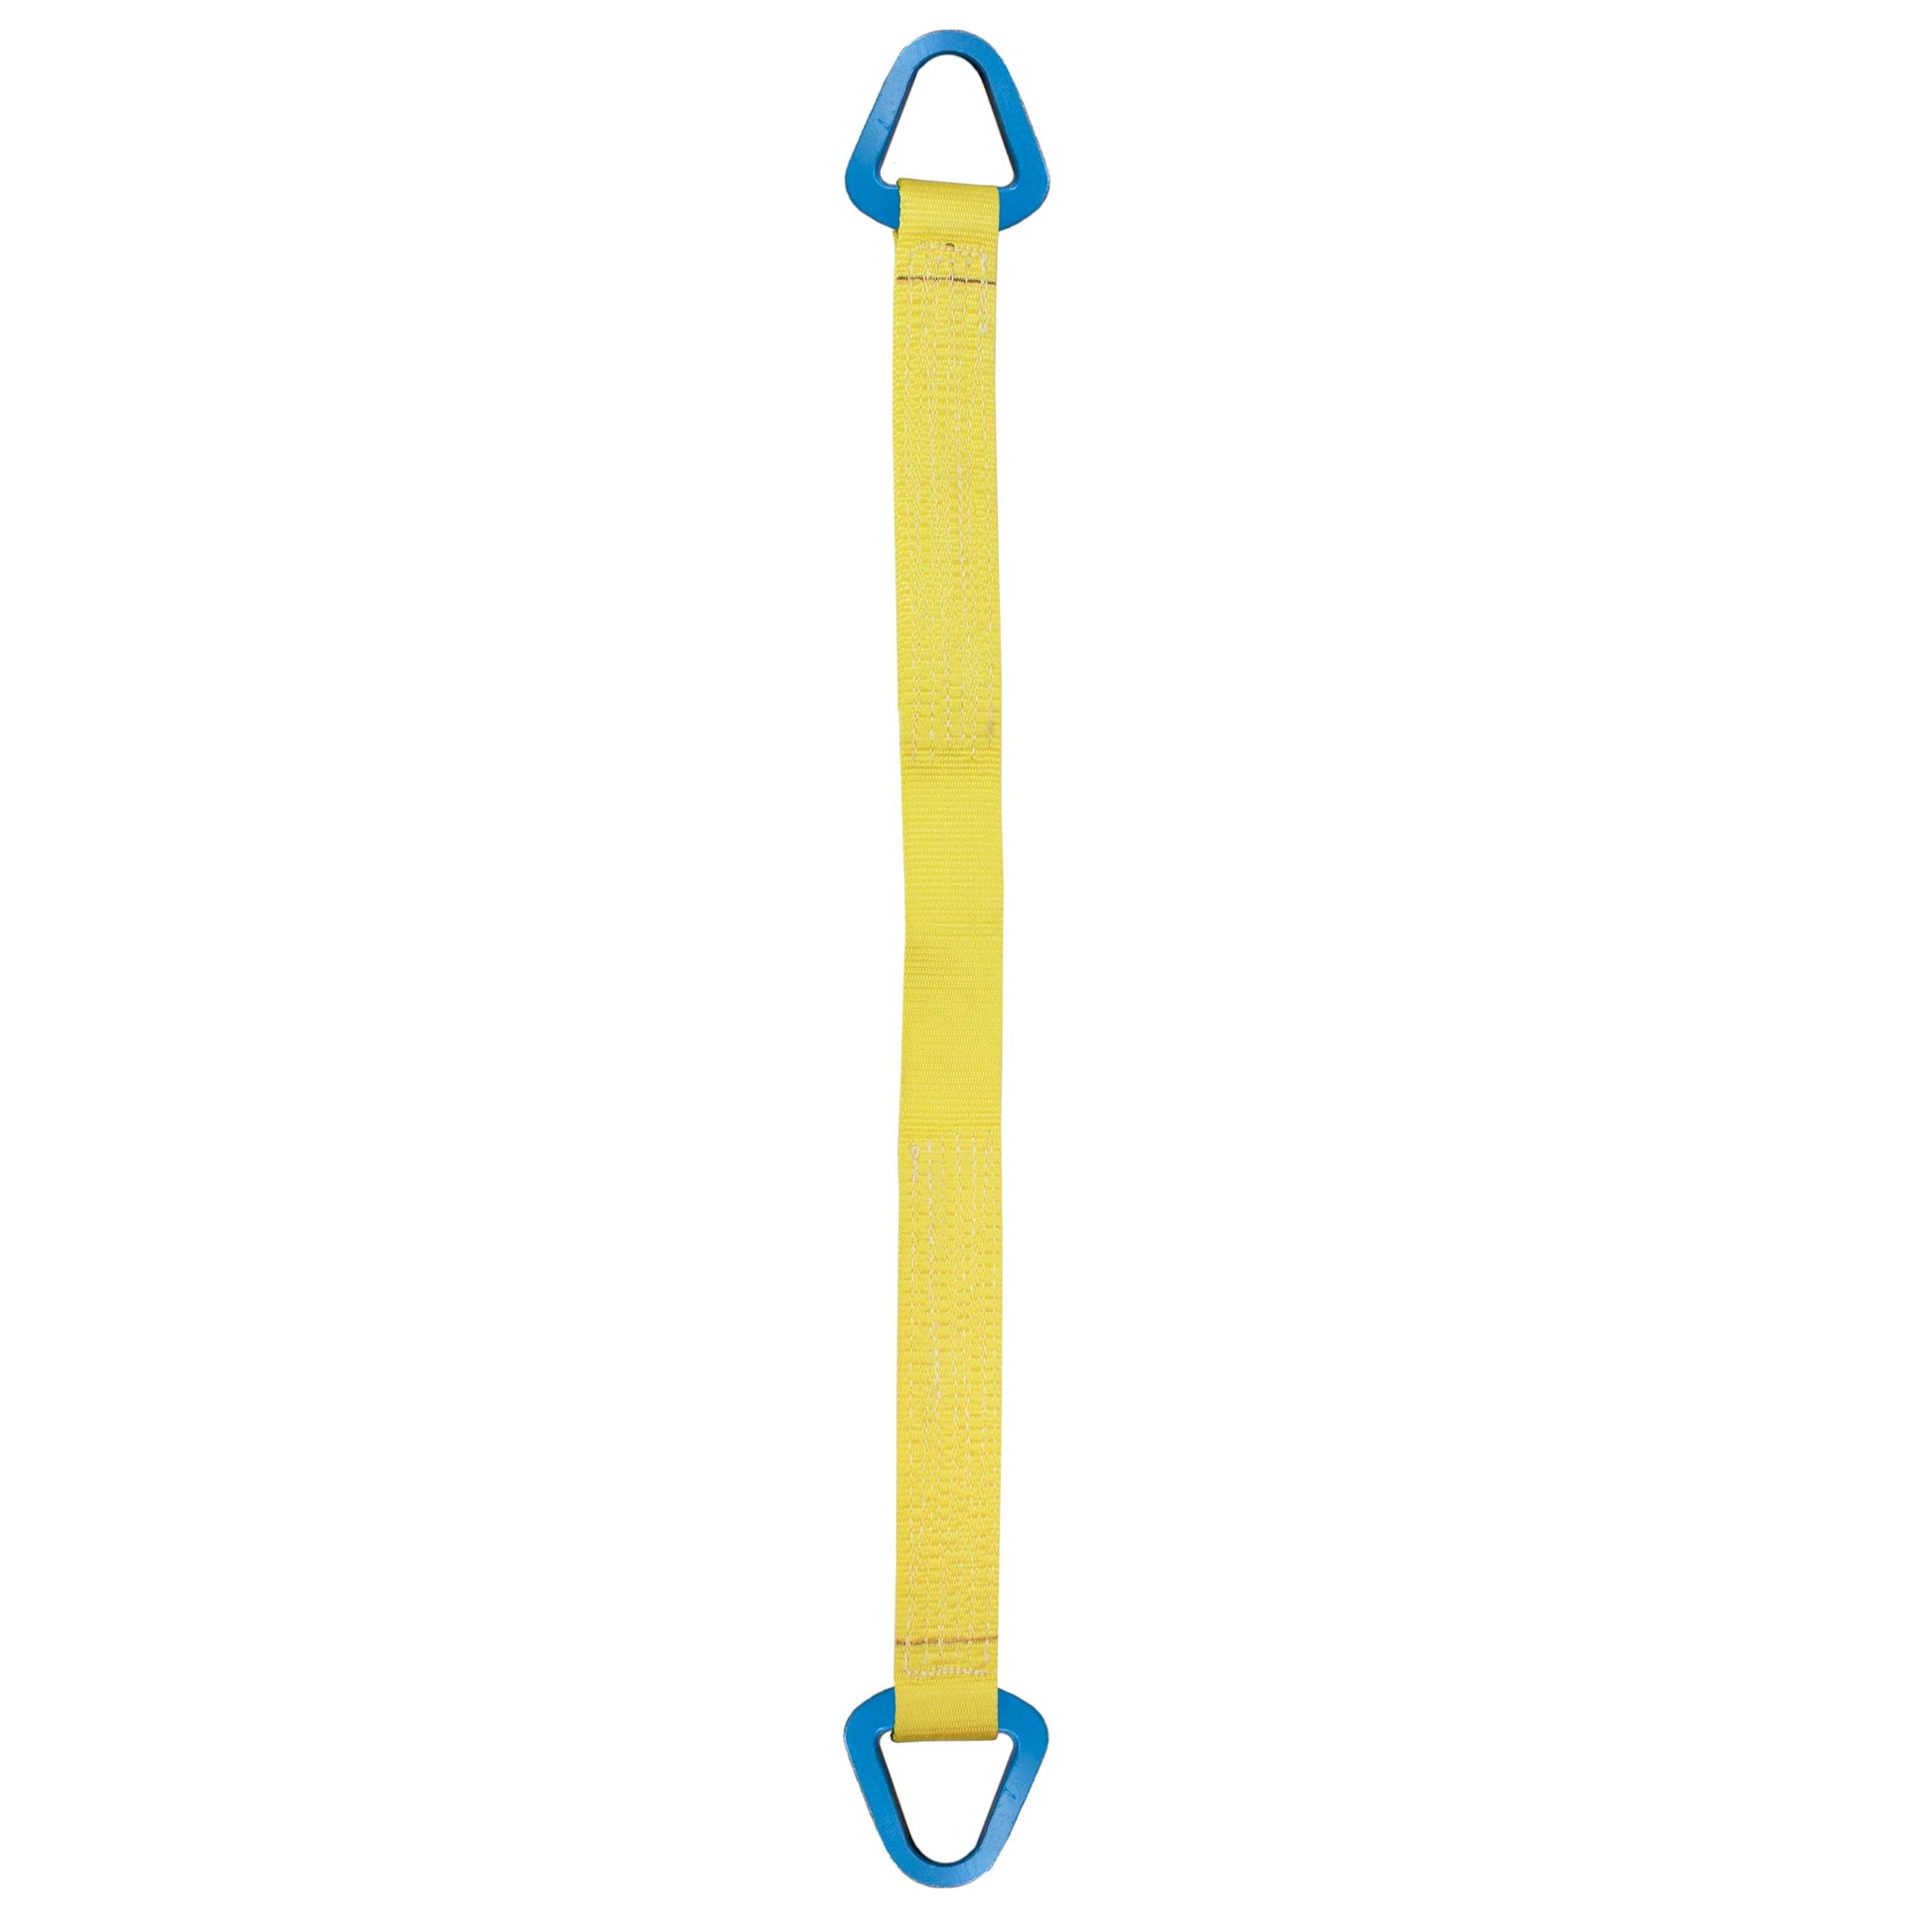 Nylon Lifting Sling Triangle 4 inch x 10 foot 2ply image 1 of 2